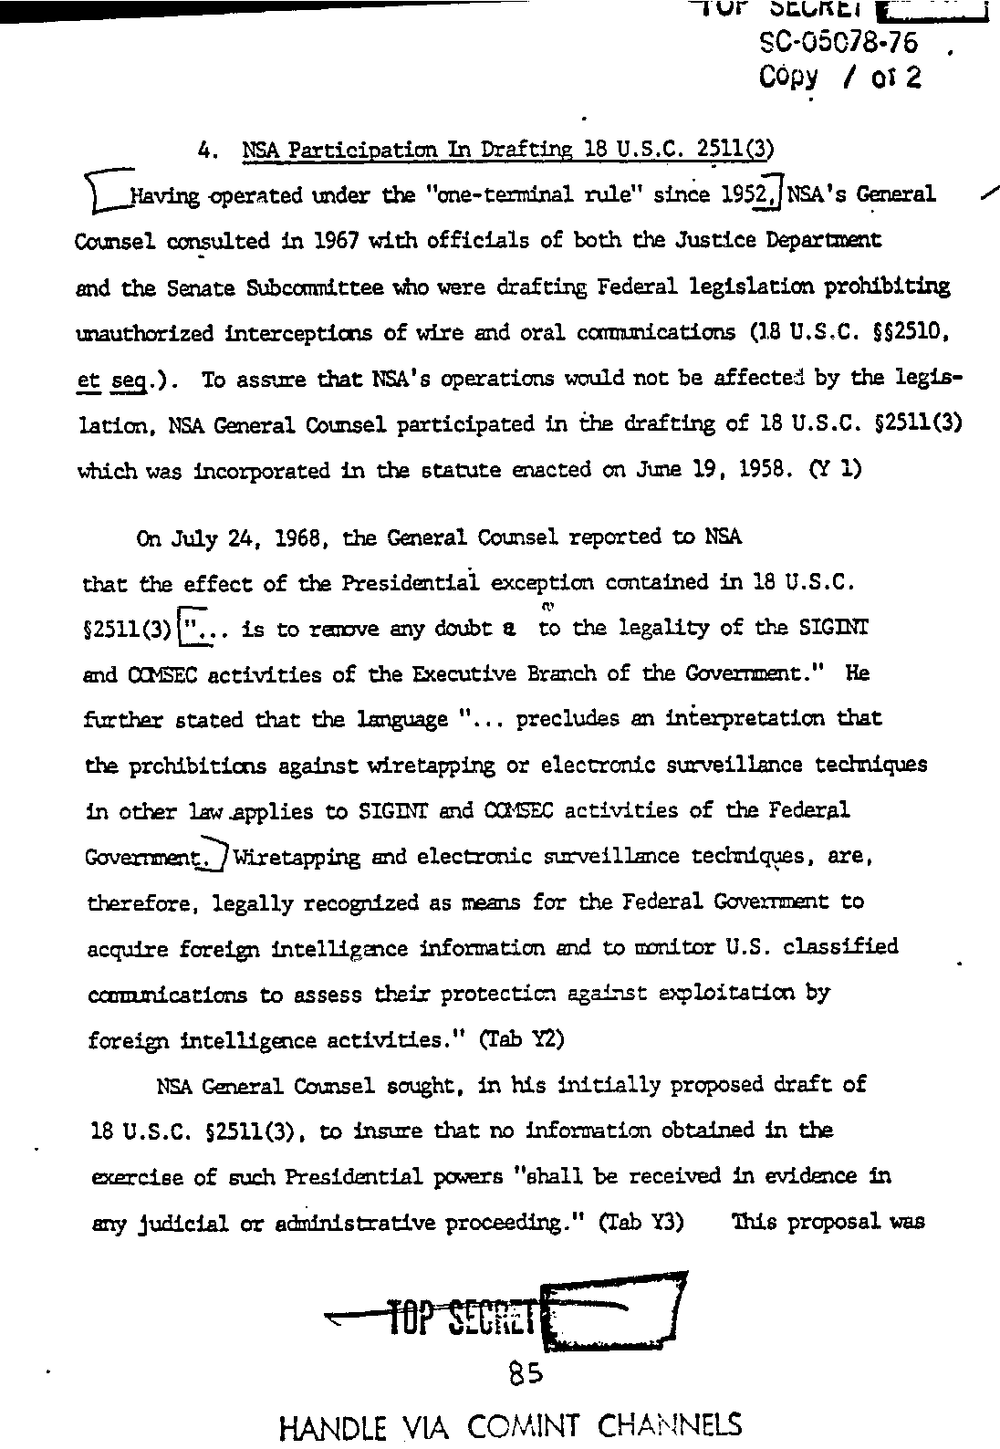 Page 93 from Report on Inquiry Into CIA Related Electronic Surveillance Activities